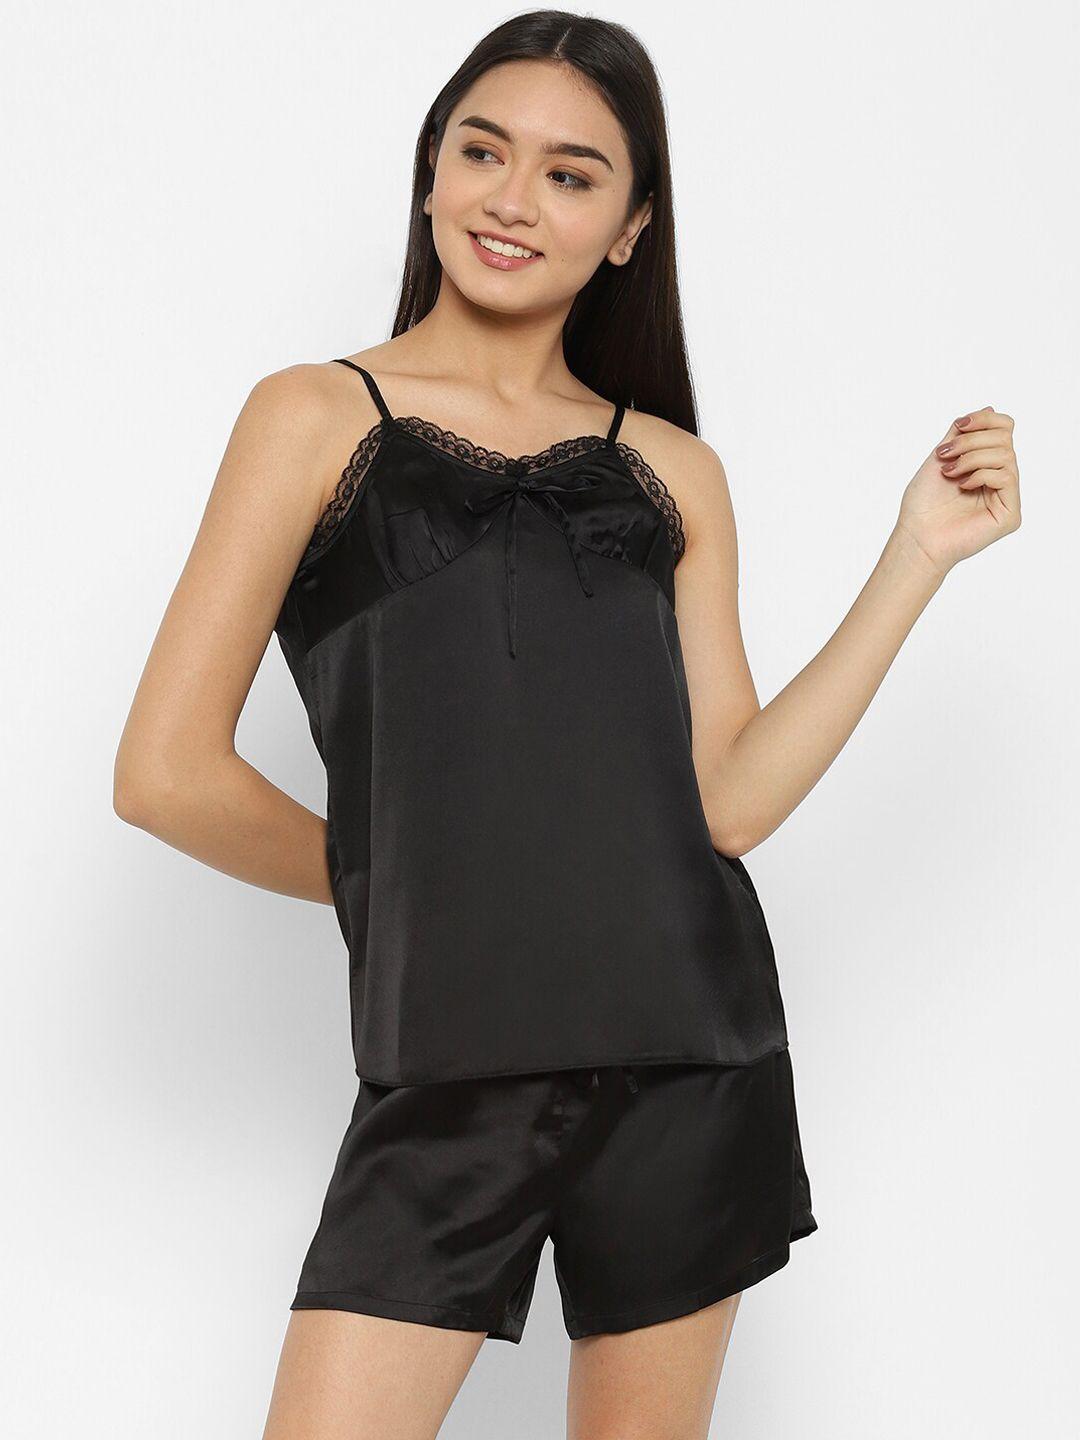 house of kkarma women black camisole with shorts night suit